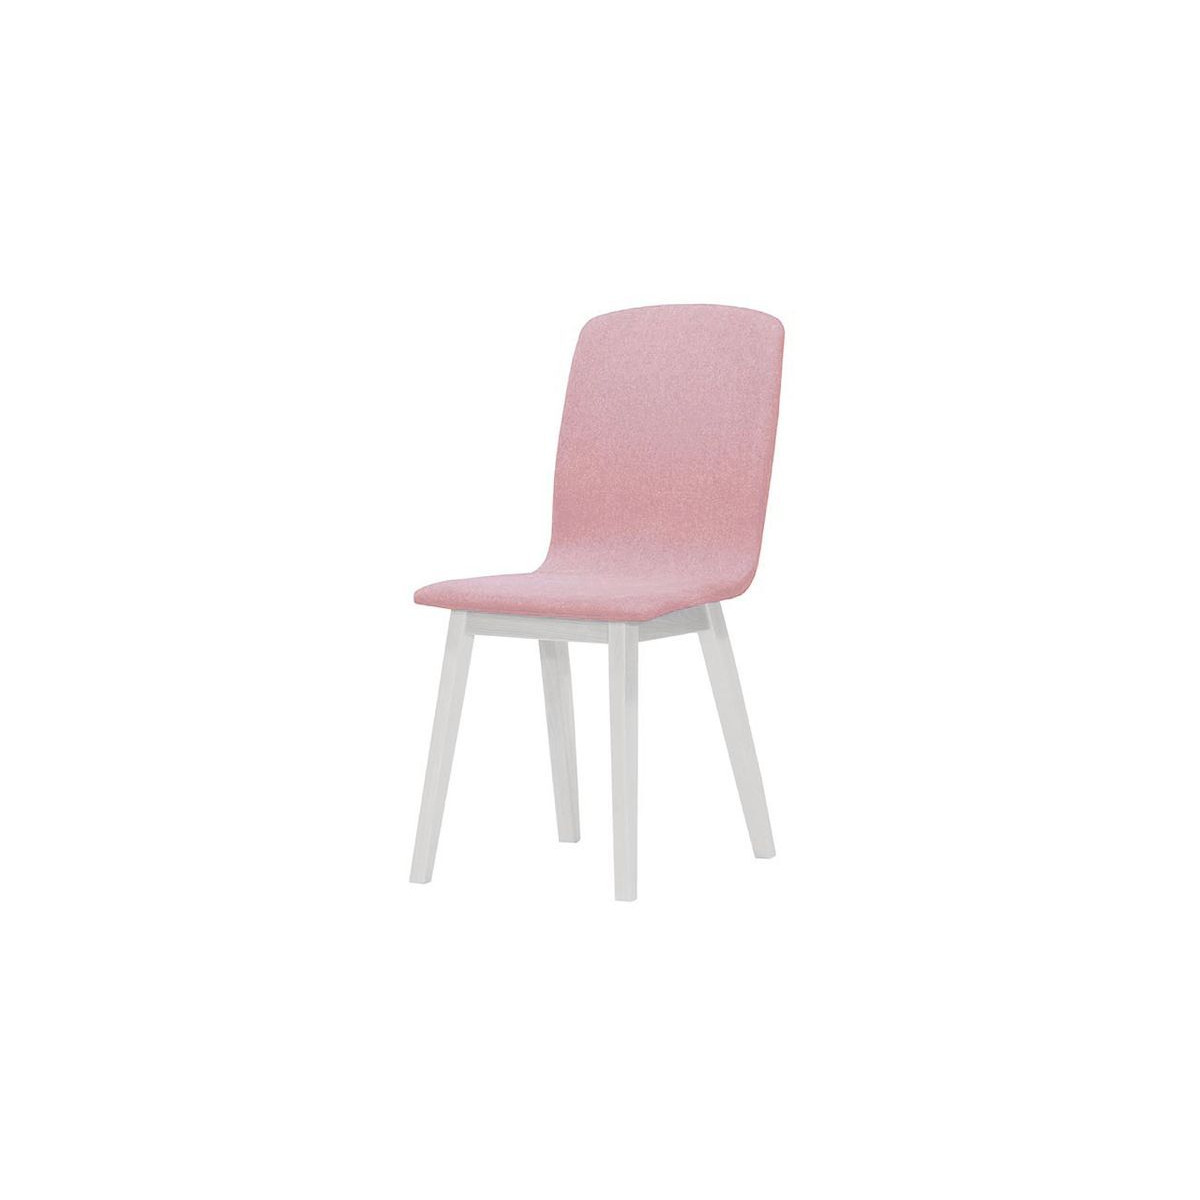 Cubo Dining Chair, pink, Leg colour: white - image 1